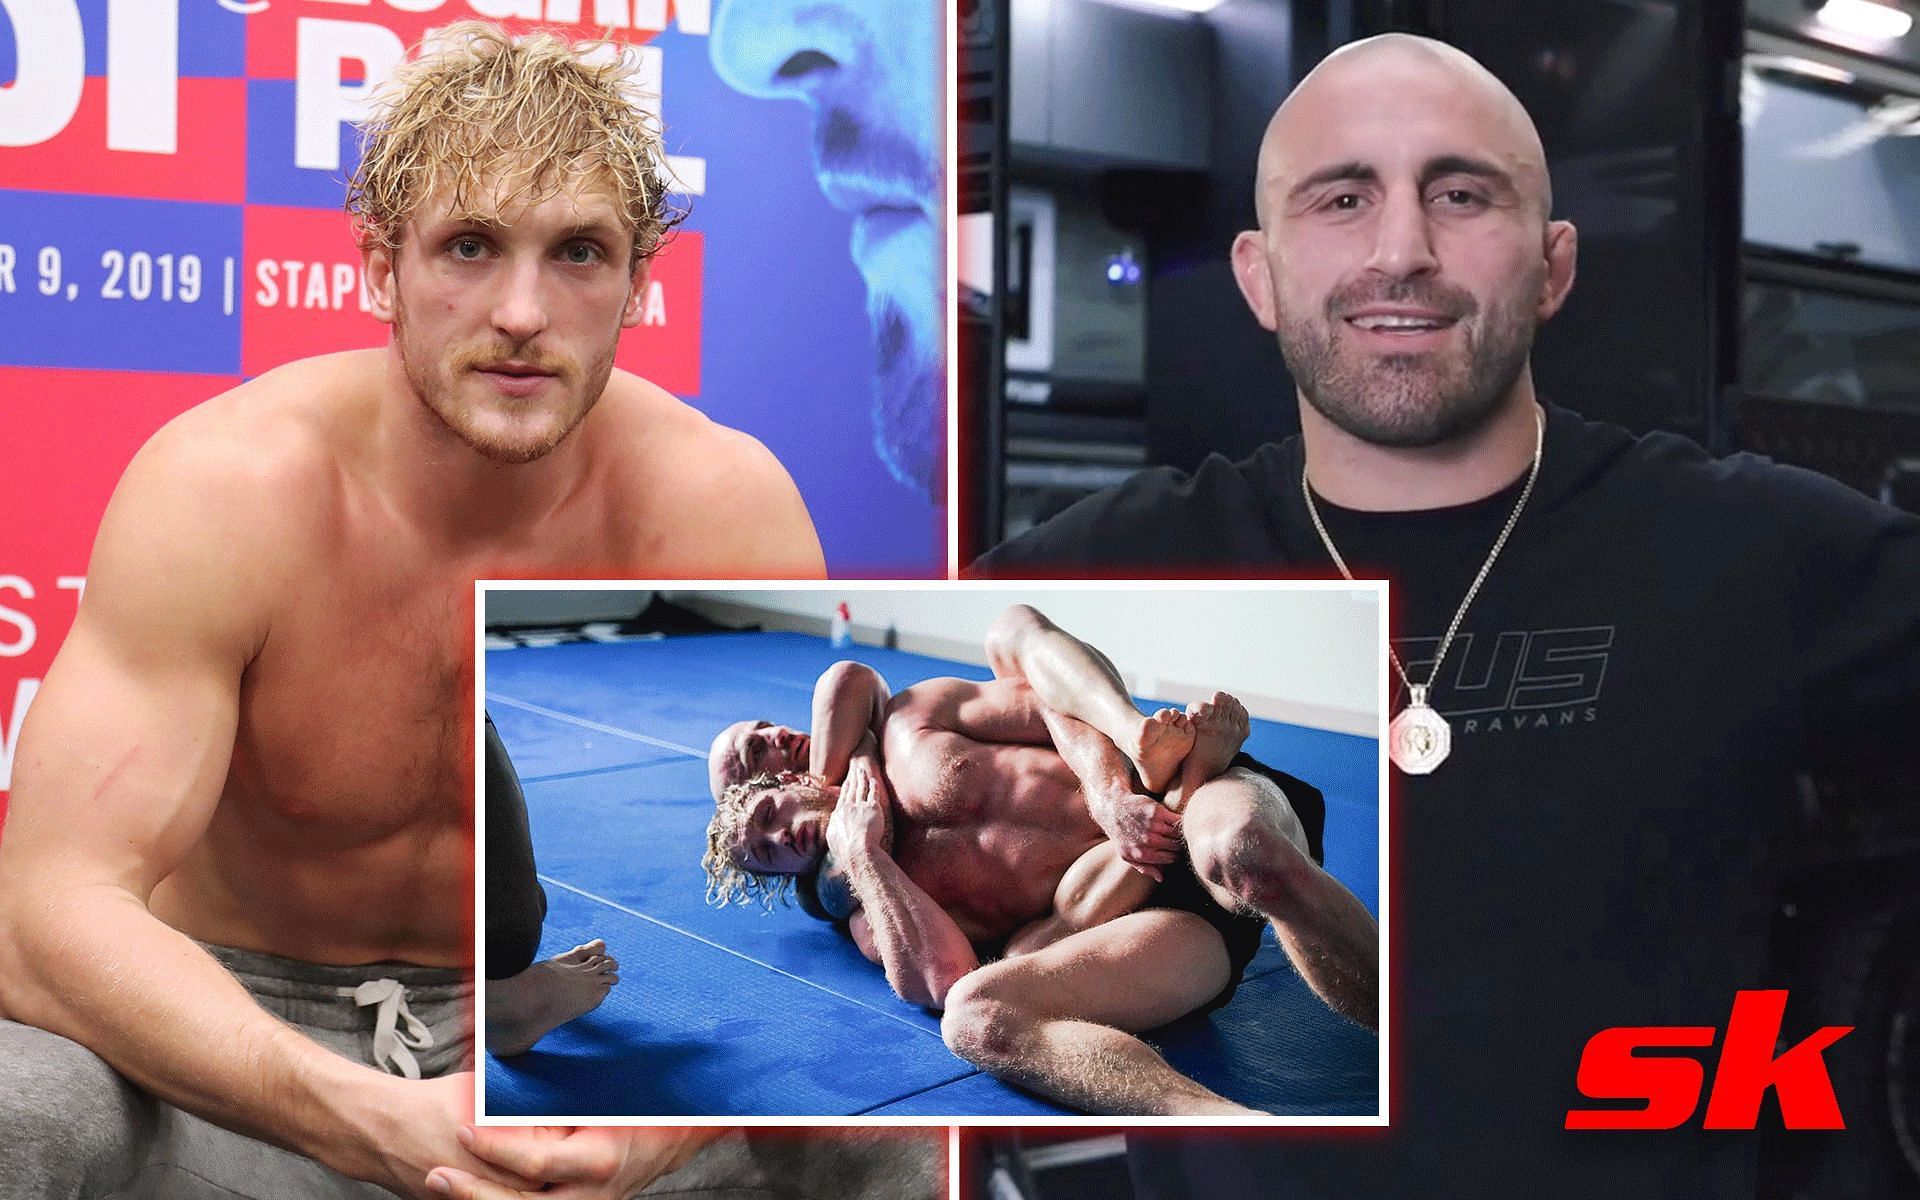 Logan Paul (left) and Alexander Volkanovski (right). [Images courtesy: left image from Getty Images and right and centre images from Instagram @alexvolkanovski]